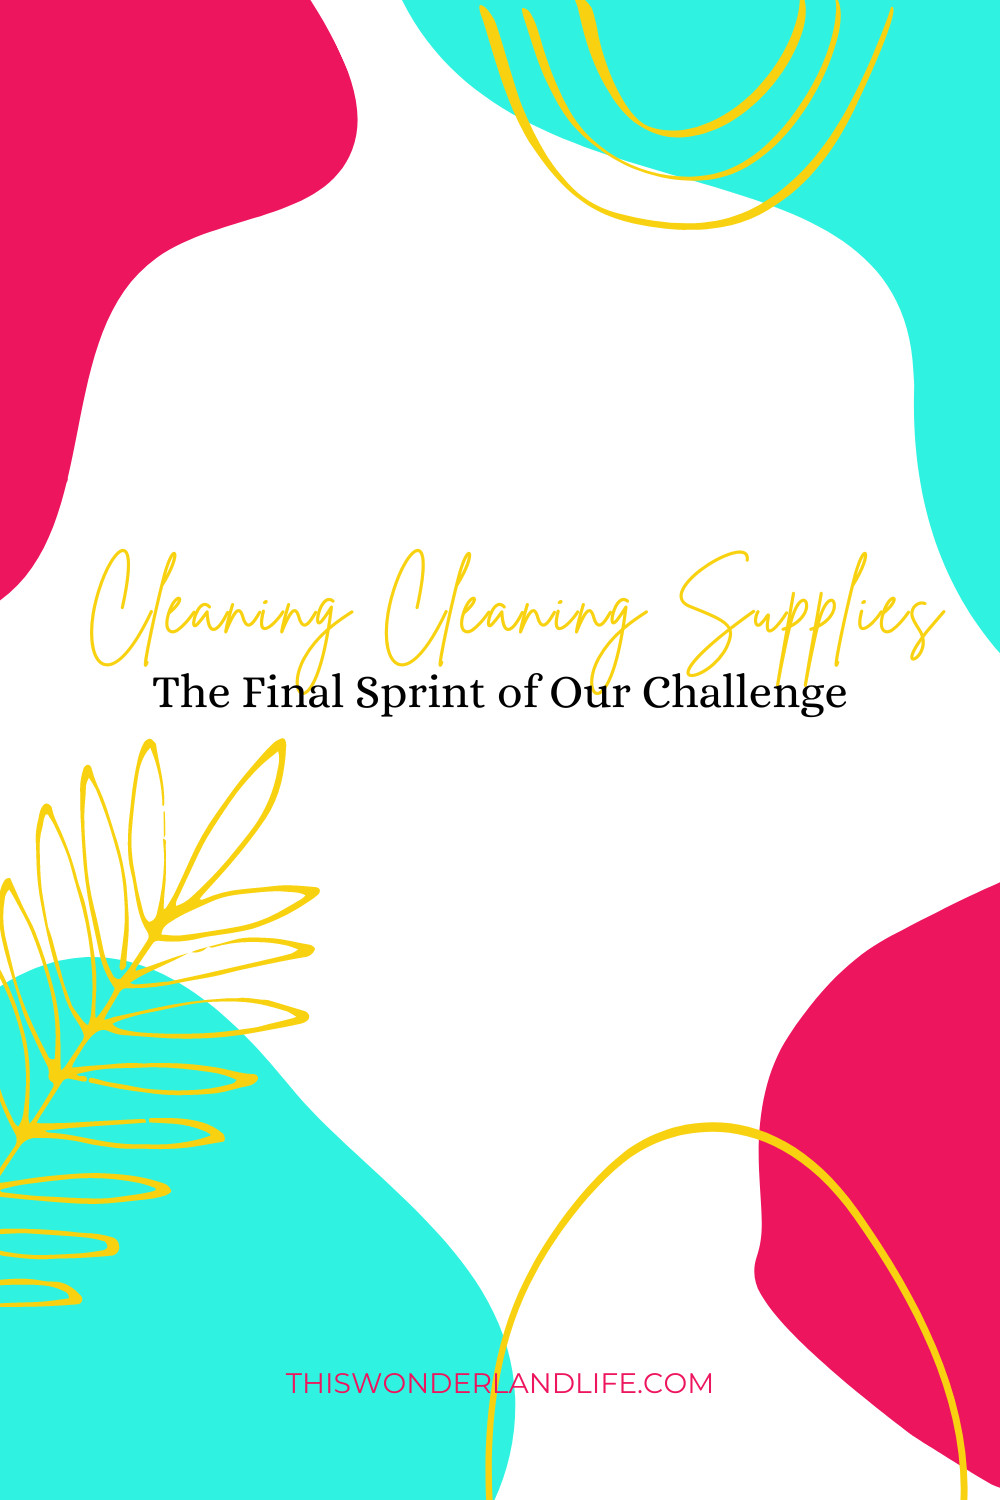  The Final Day of Our Month-Long Cleaning Challenge: Cleaning Your Cleaning Supplies!